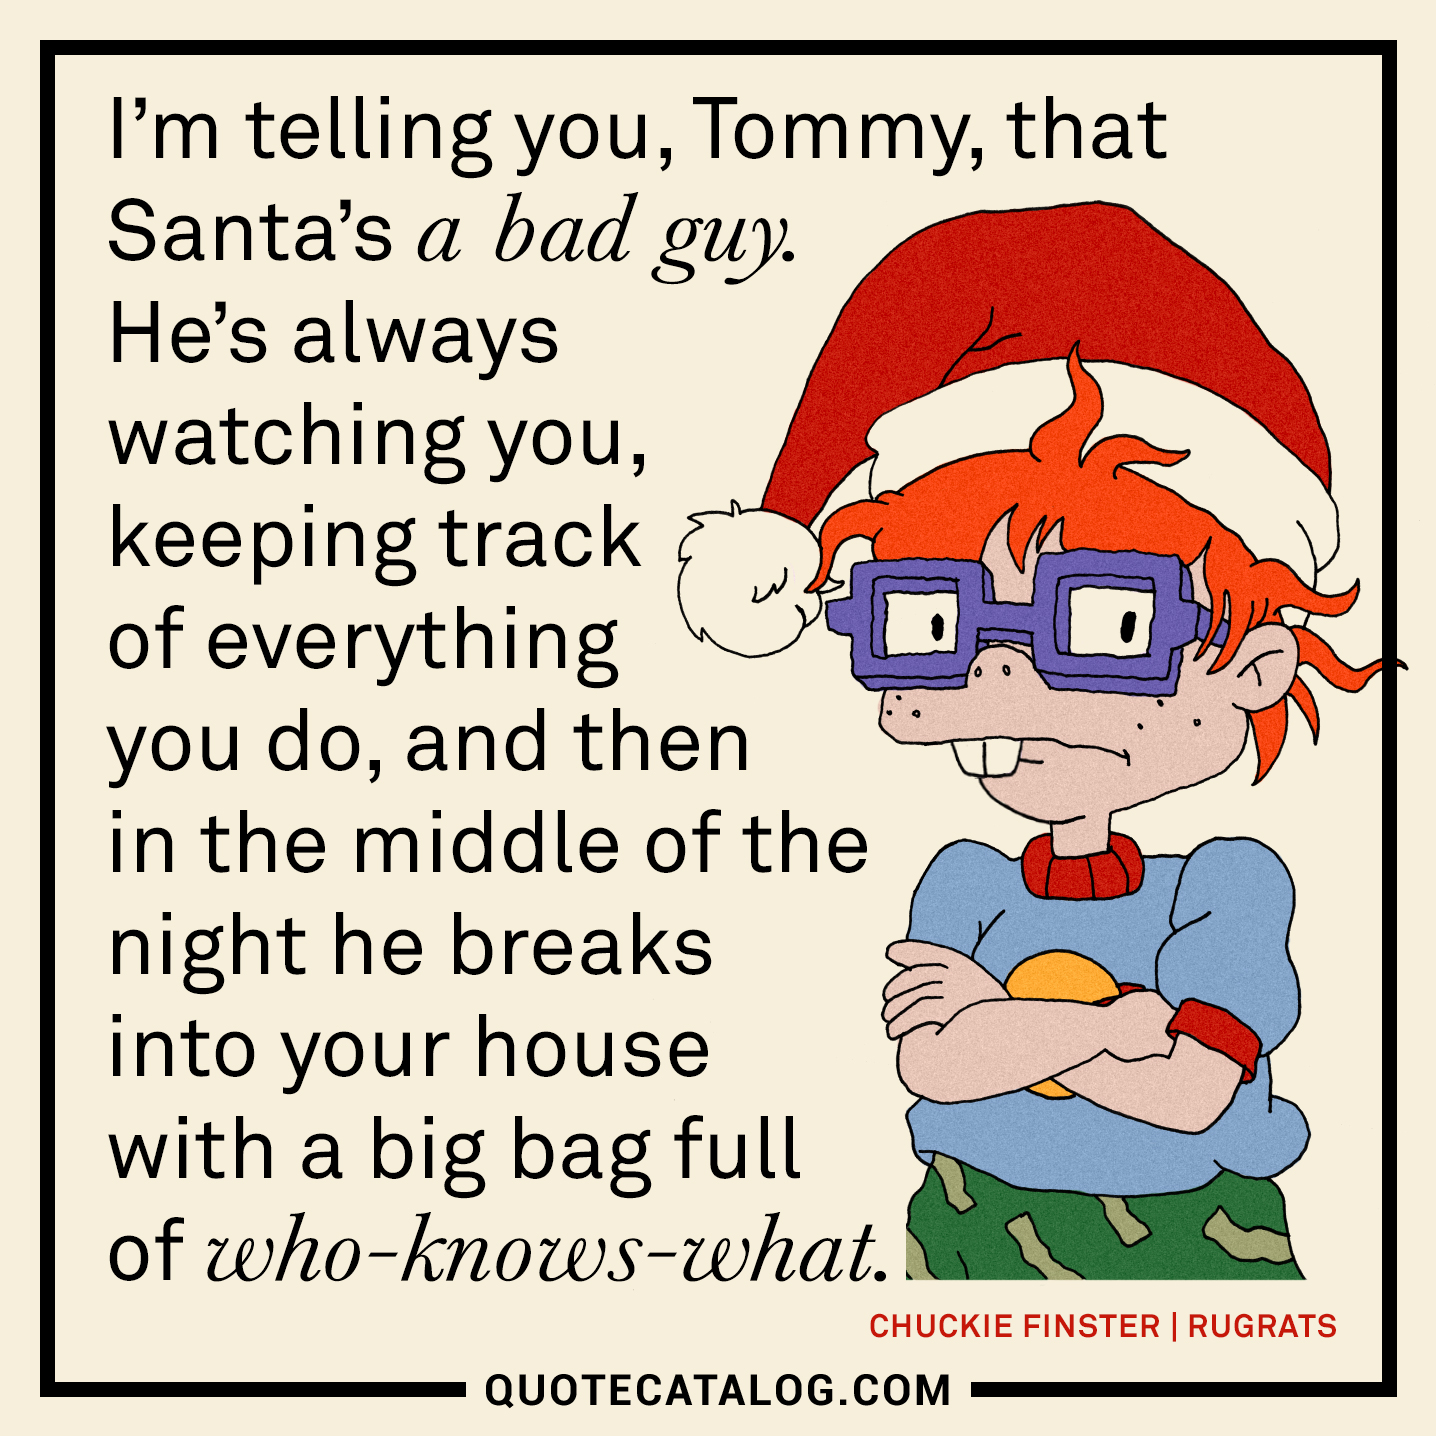 Nancy Cartwright As Chuckie Finster Voice Quote I M Telling You Tommy That Santa S A B